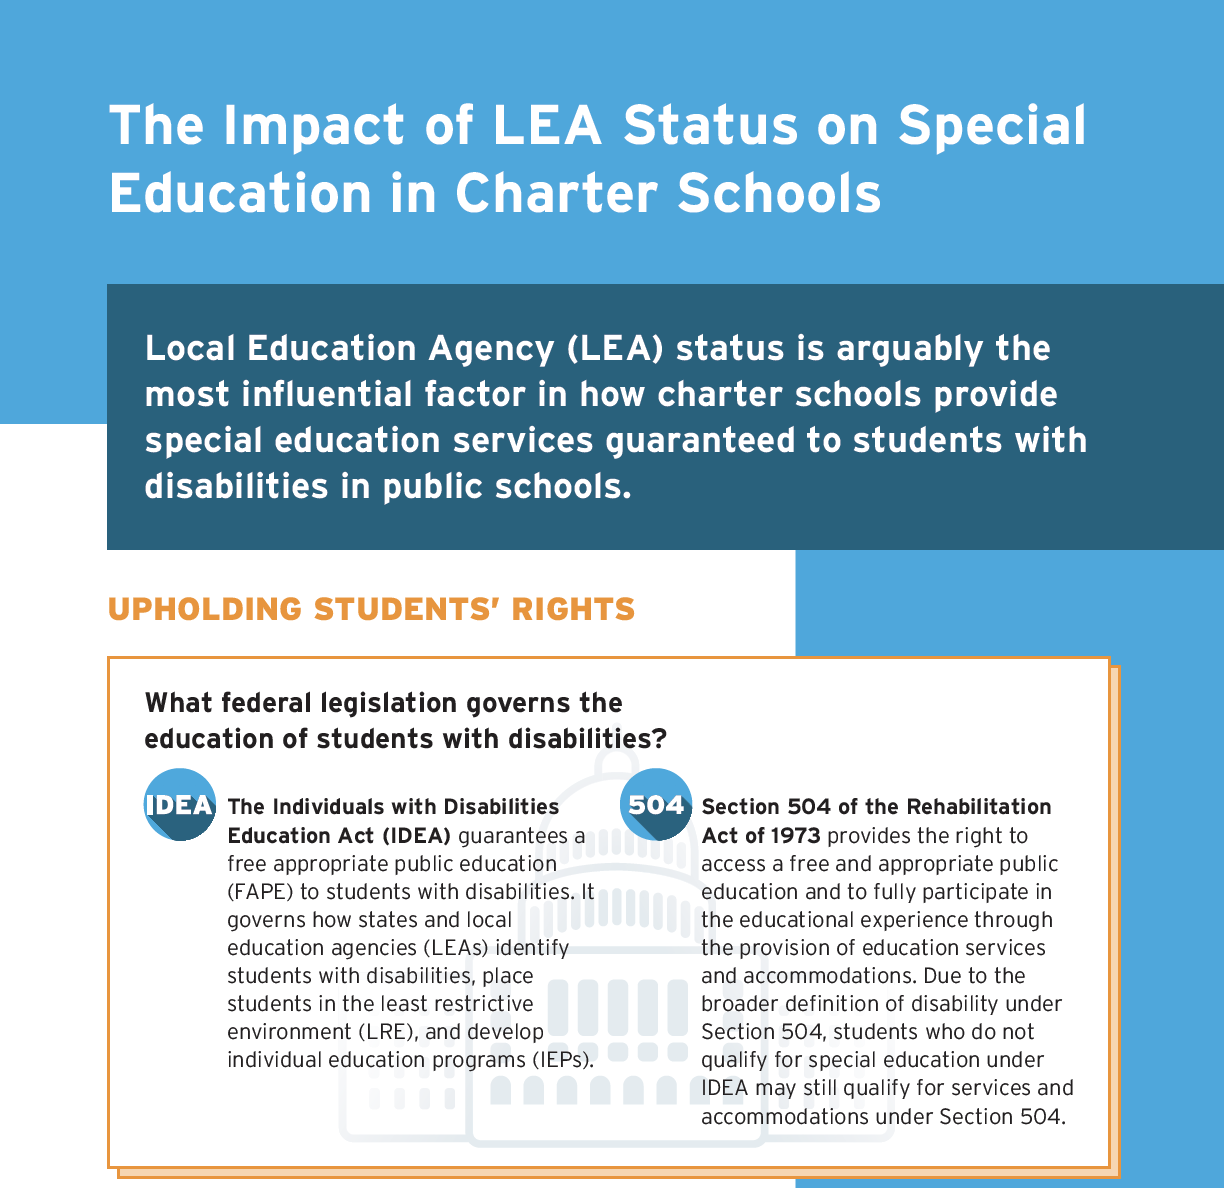 The Impact of LEA Status on Special Education in Charter Schools Infographic